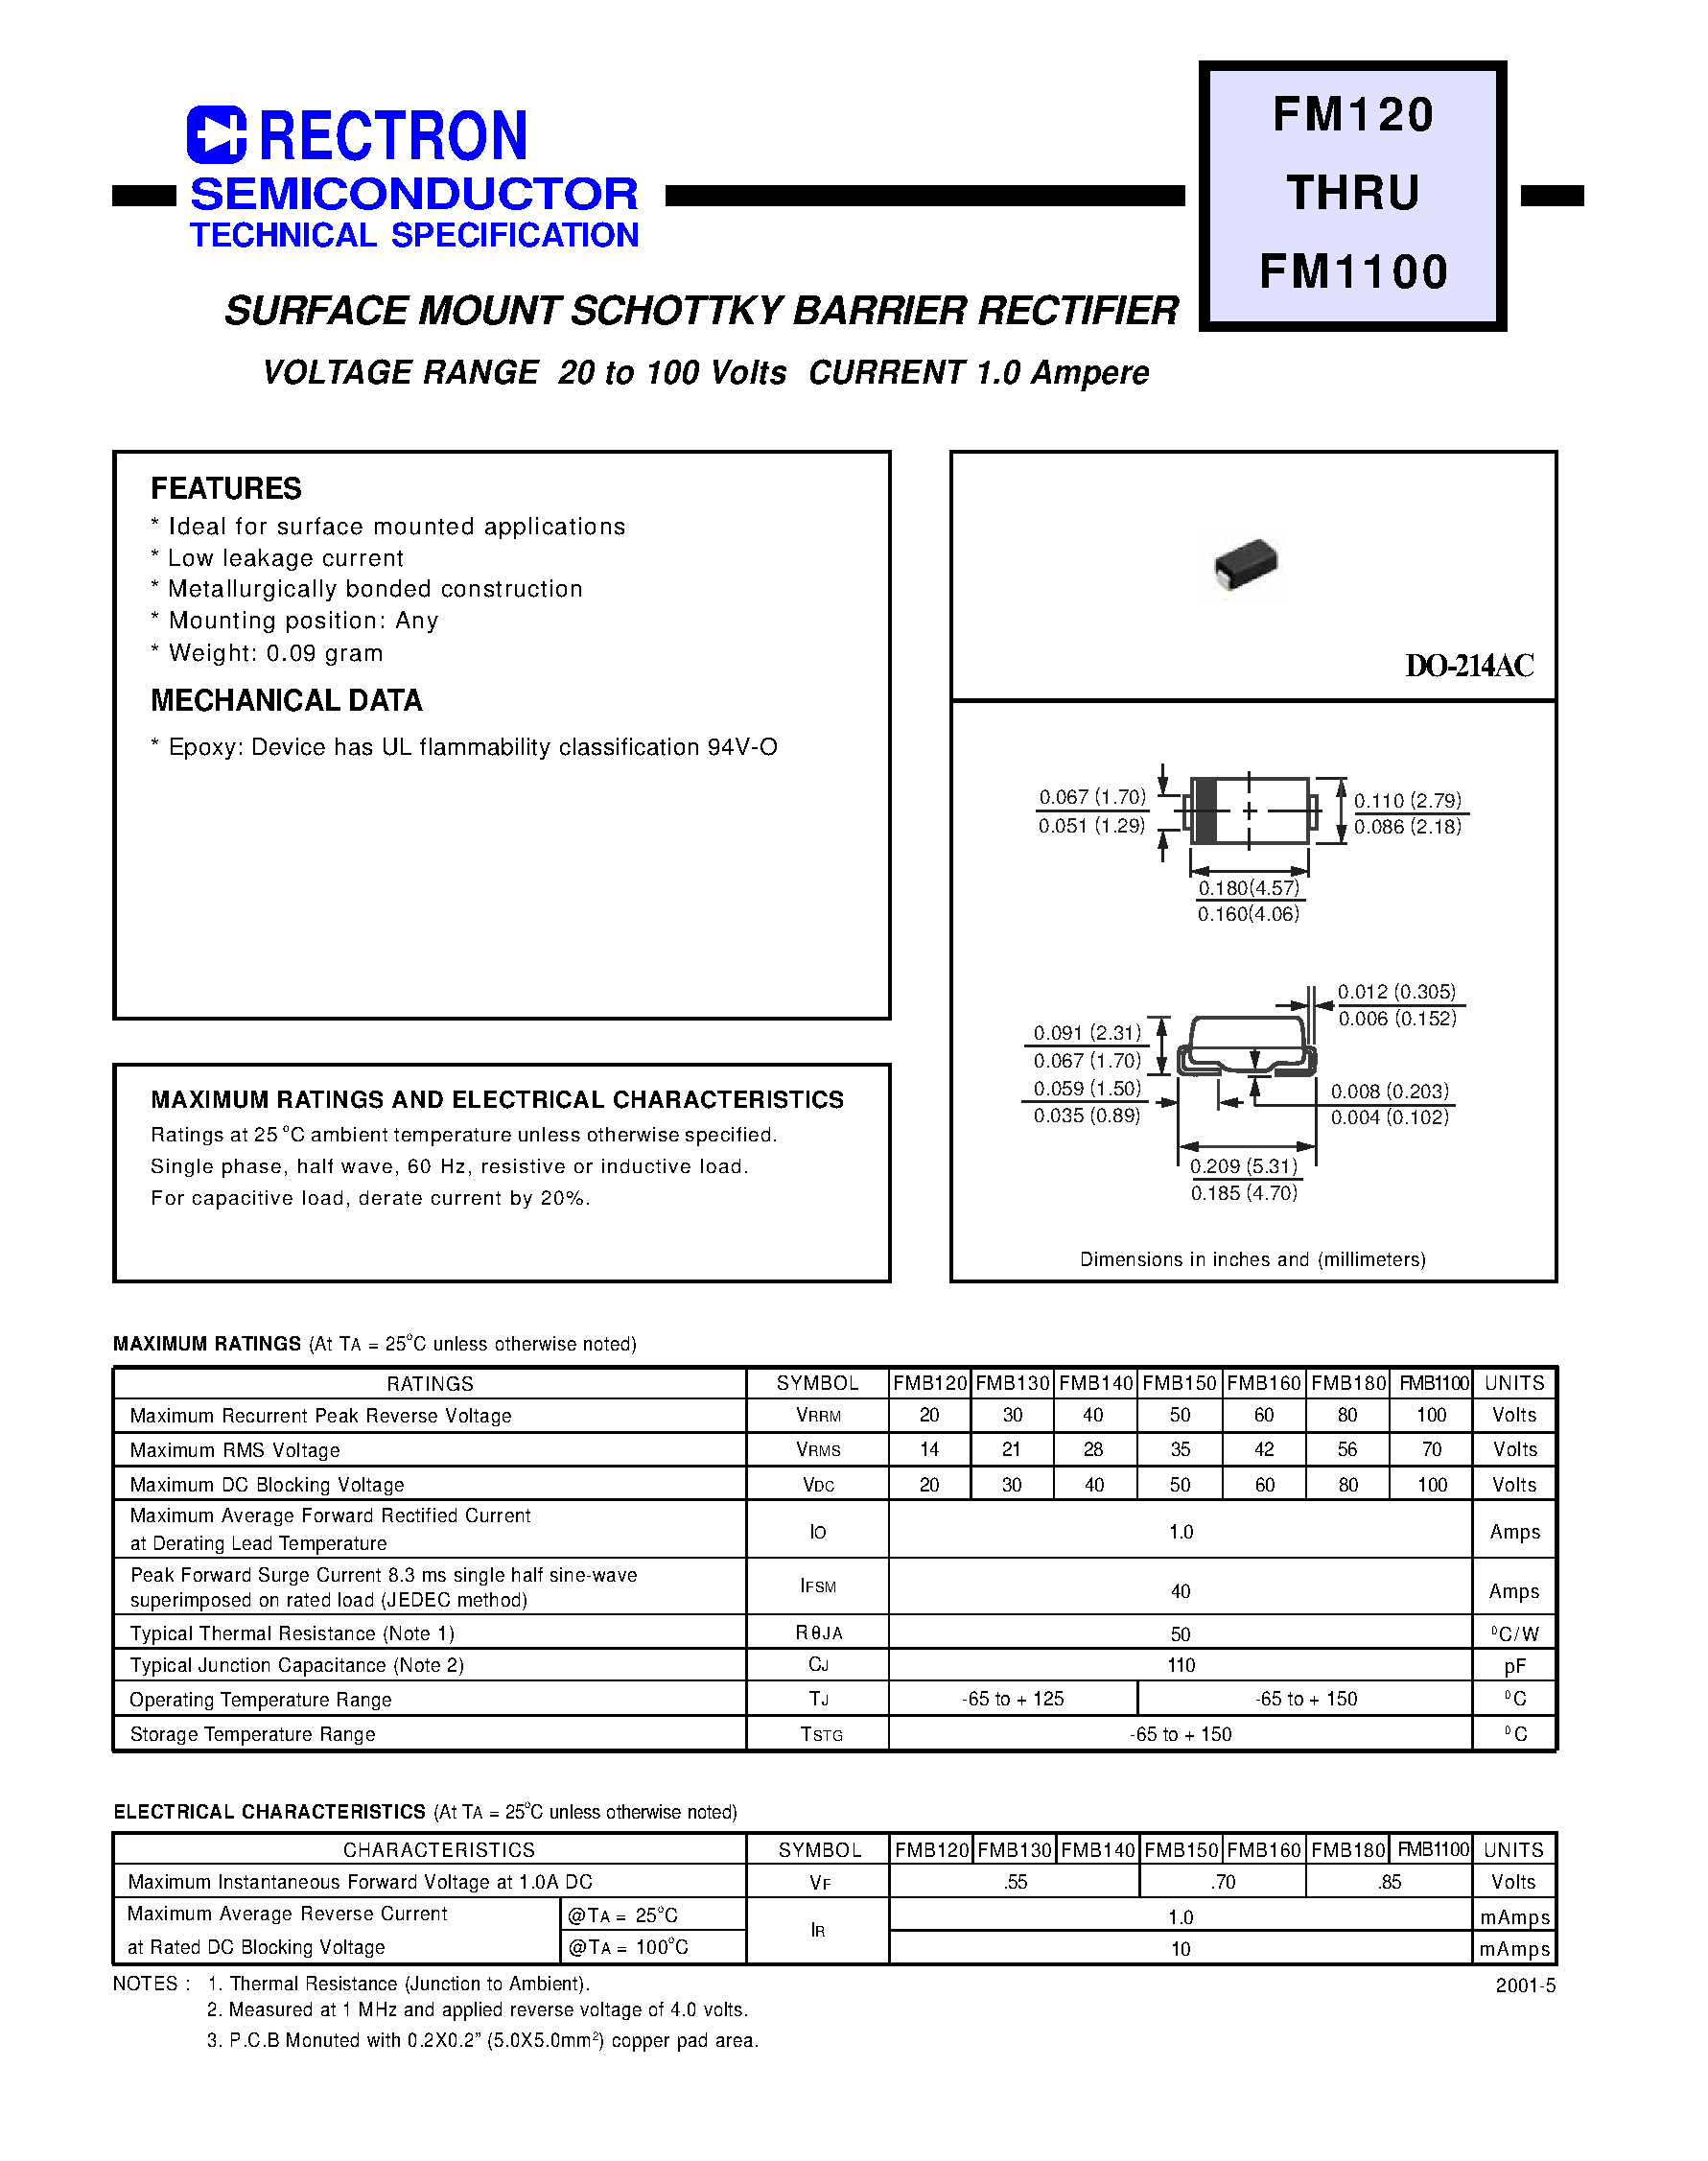 Datasheet FMB160 - SURFACE MOUNT SCHOTTKY BARRIER RECTIFIER (VOLTAGE RANGE 20 to 100 Volts CURRENT 1.0 Ampere) page 1